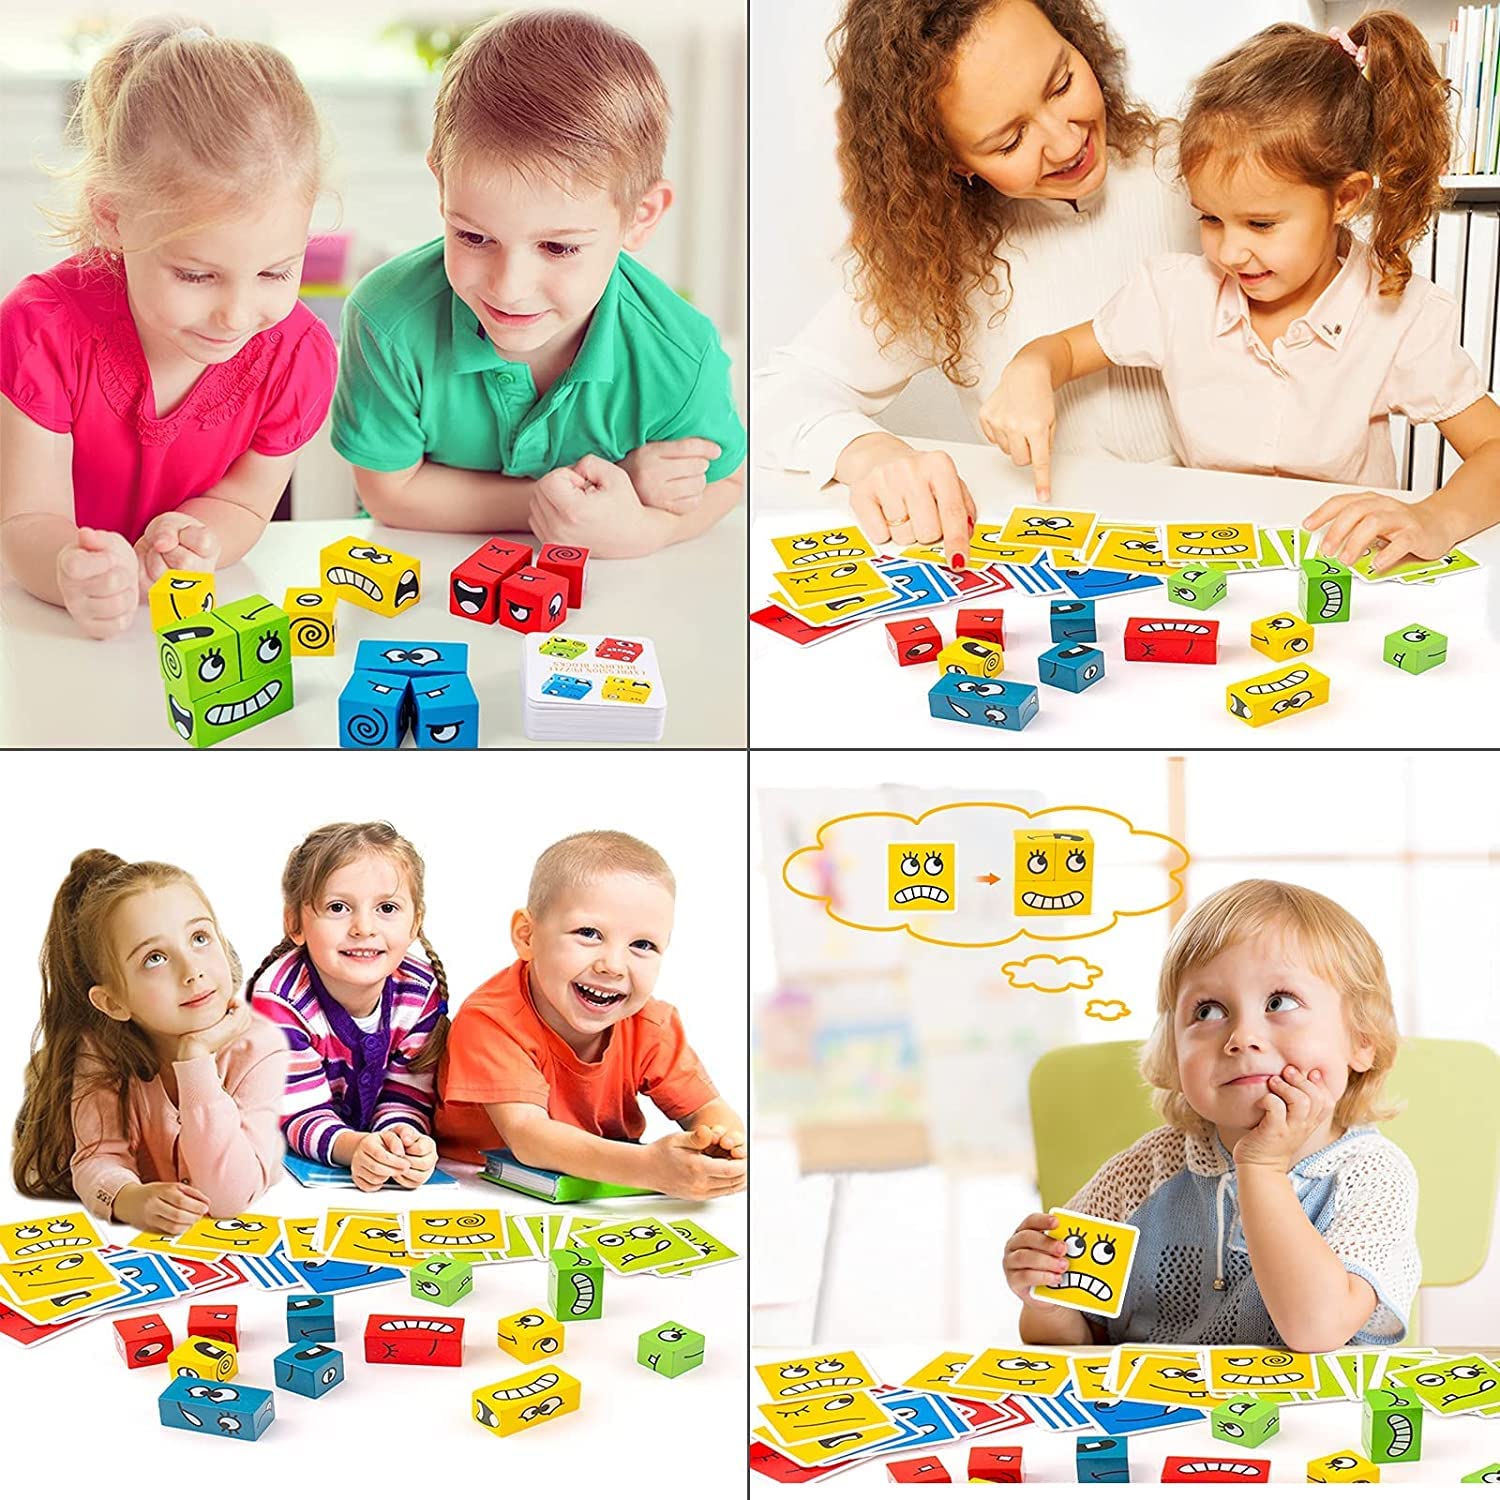 🔥Last Day 50% OFF🛎 Face-Changing Magic Cube Building Blocks